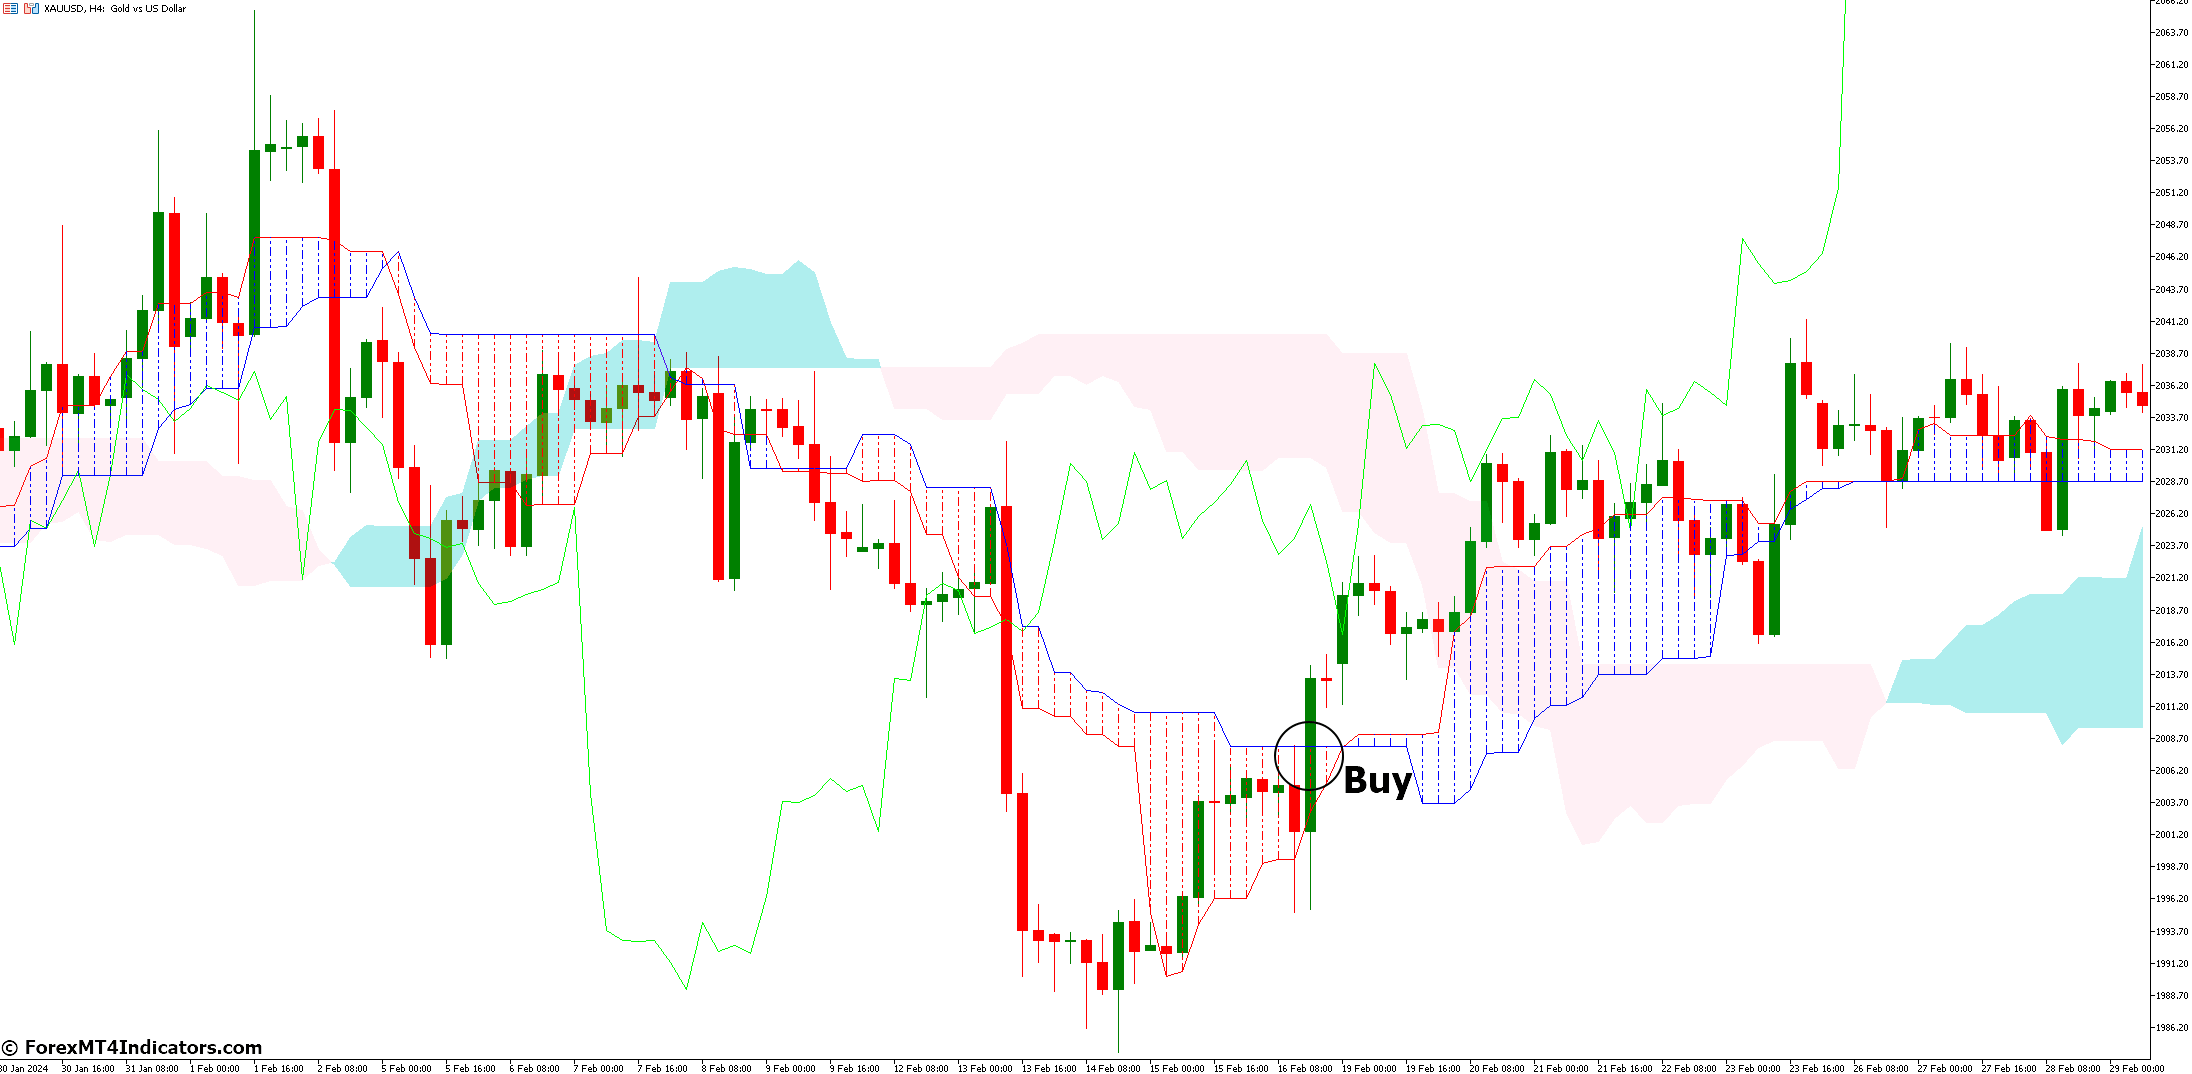 How to Trade with Ichimoku Forex Indicator - Buy Entry